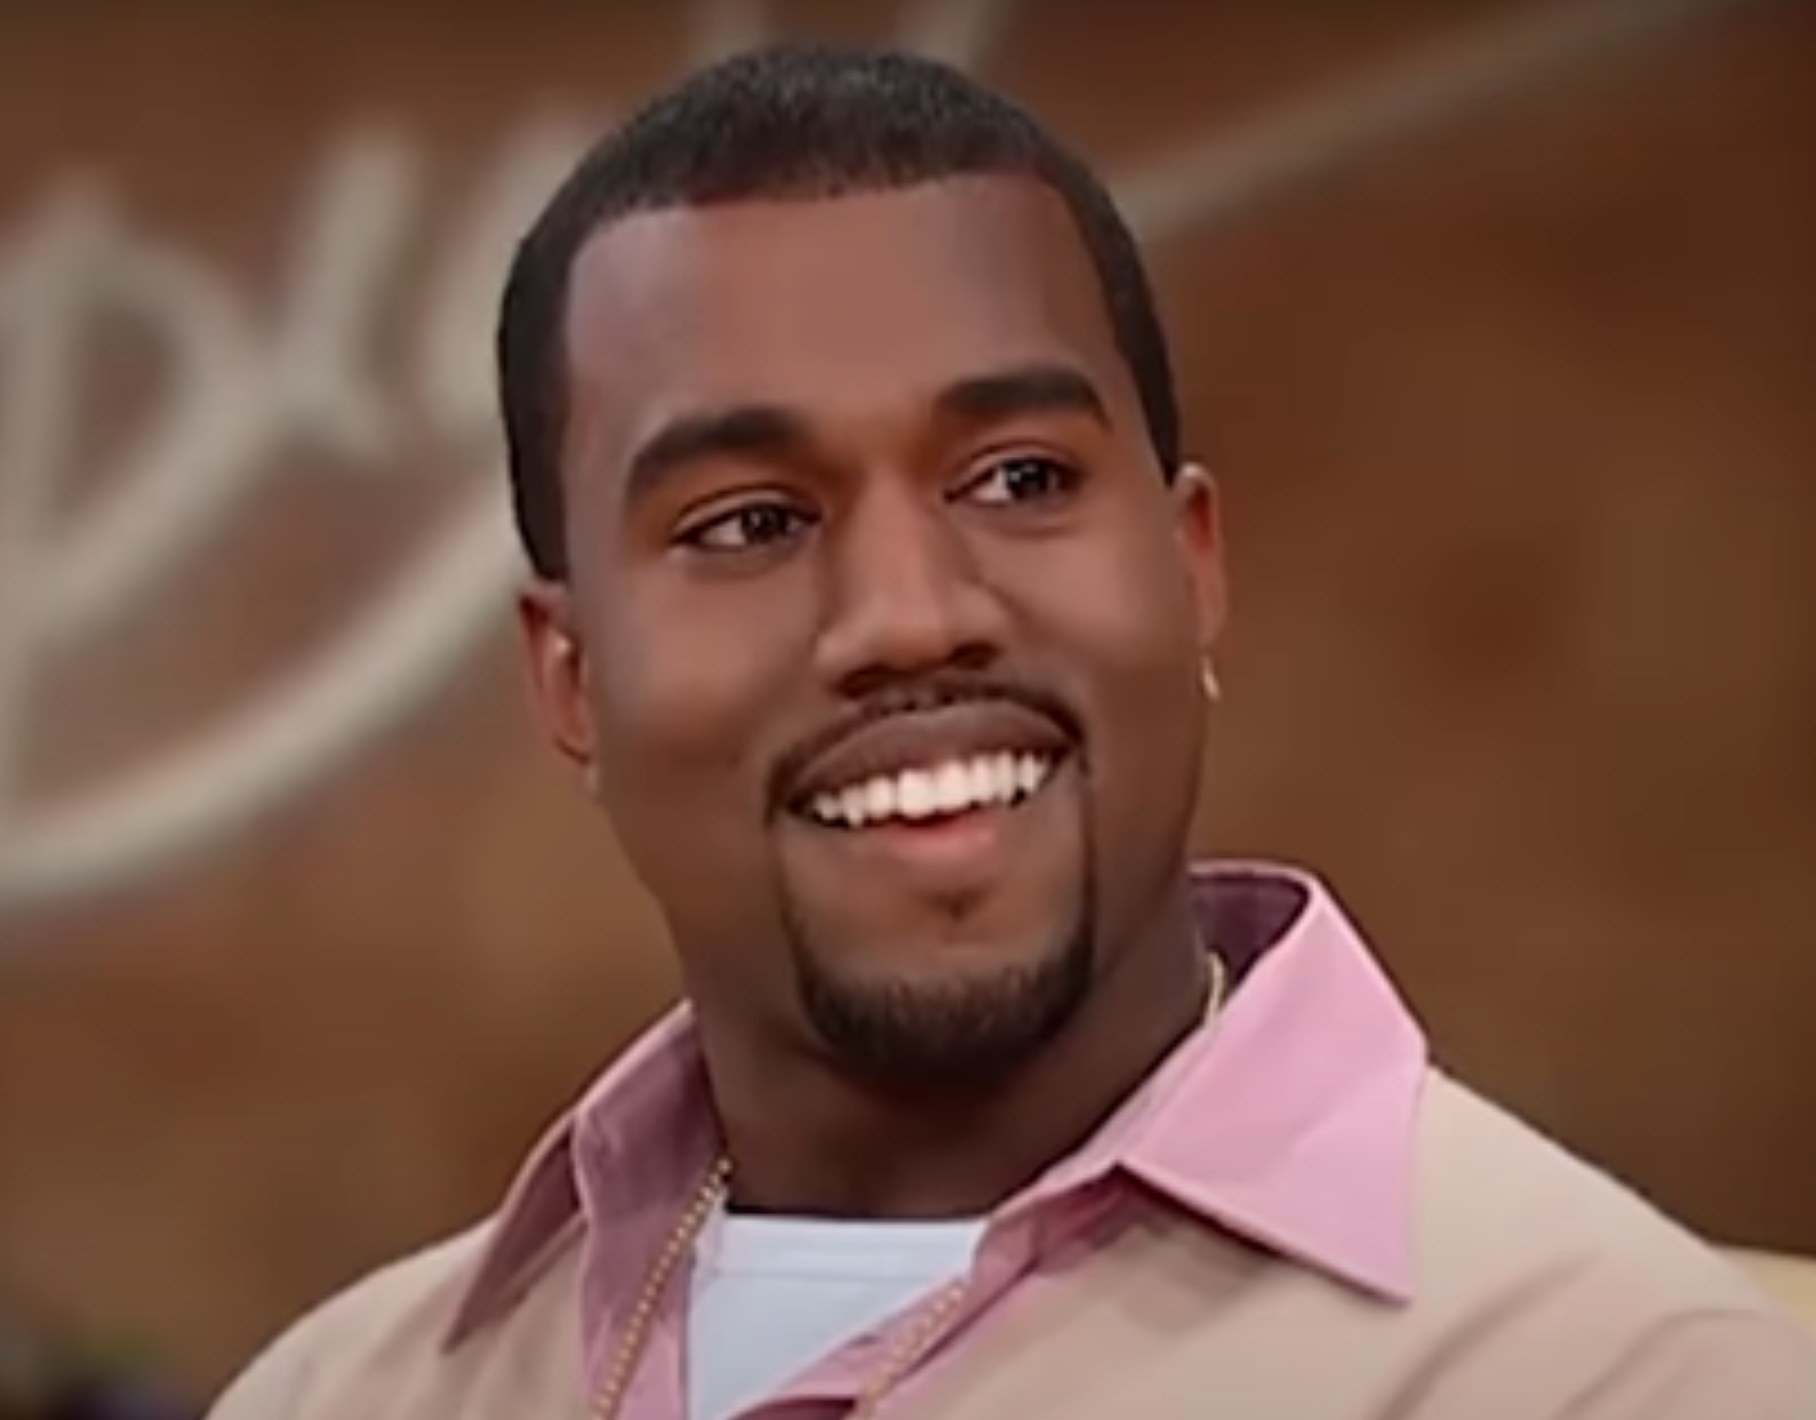 Kanye West visits &quot;The Oprah Winfrey Show&quot; in 2005